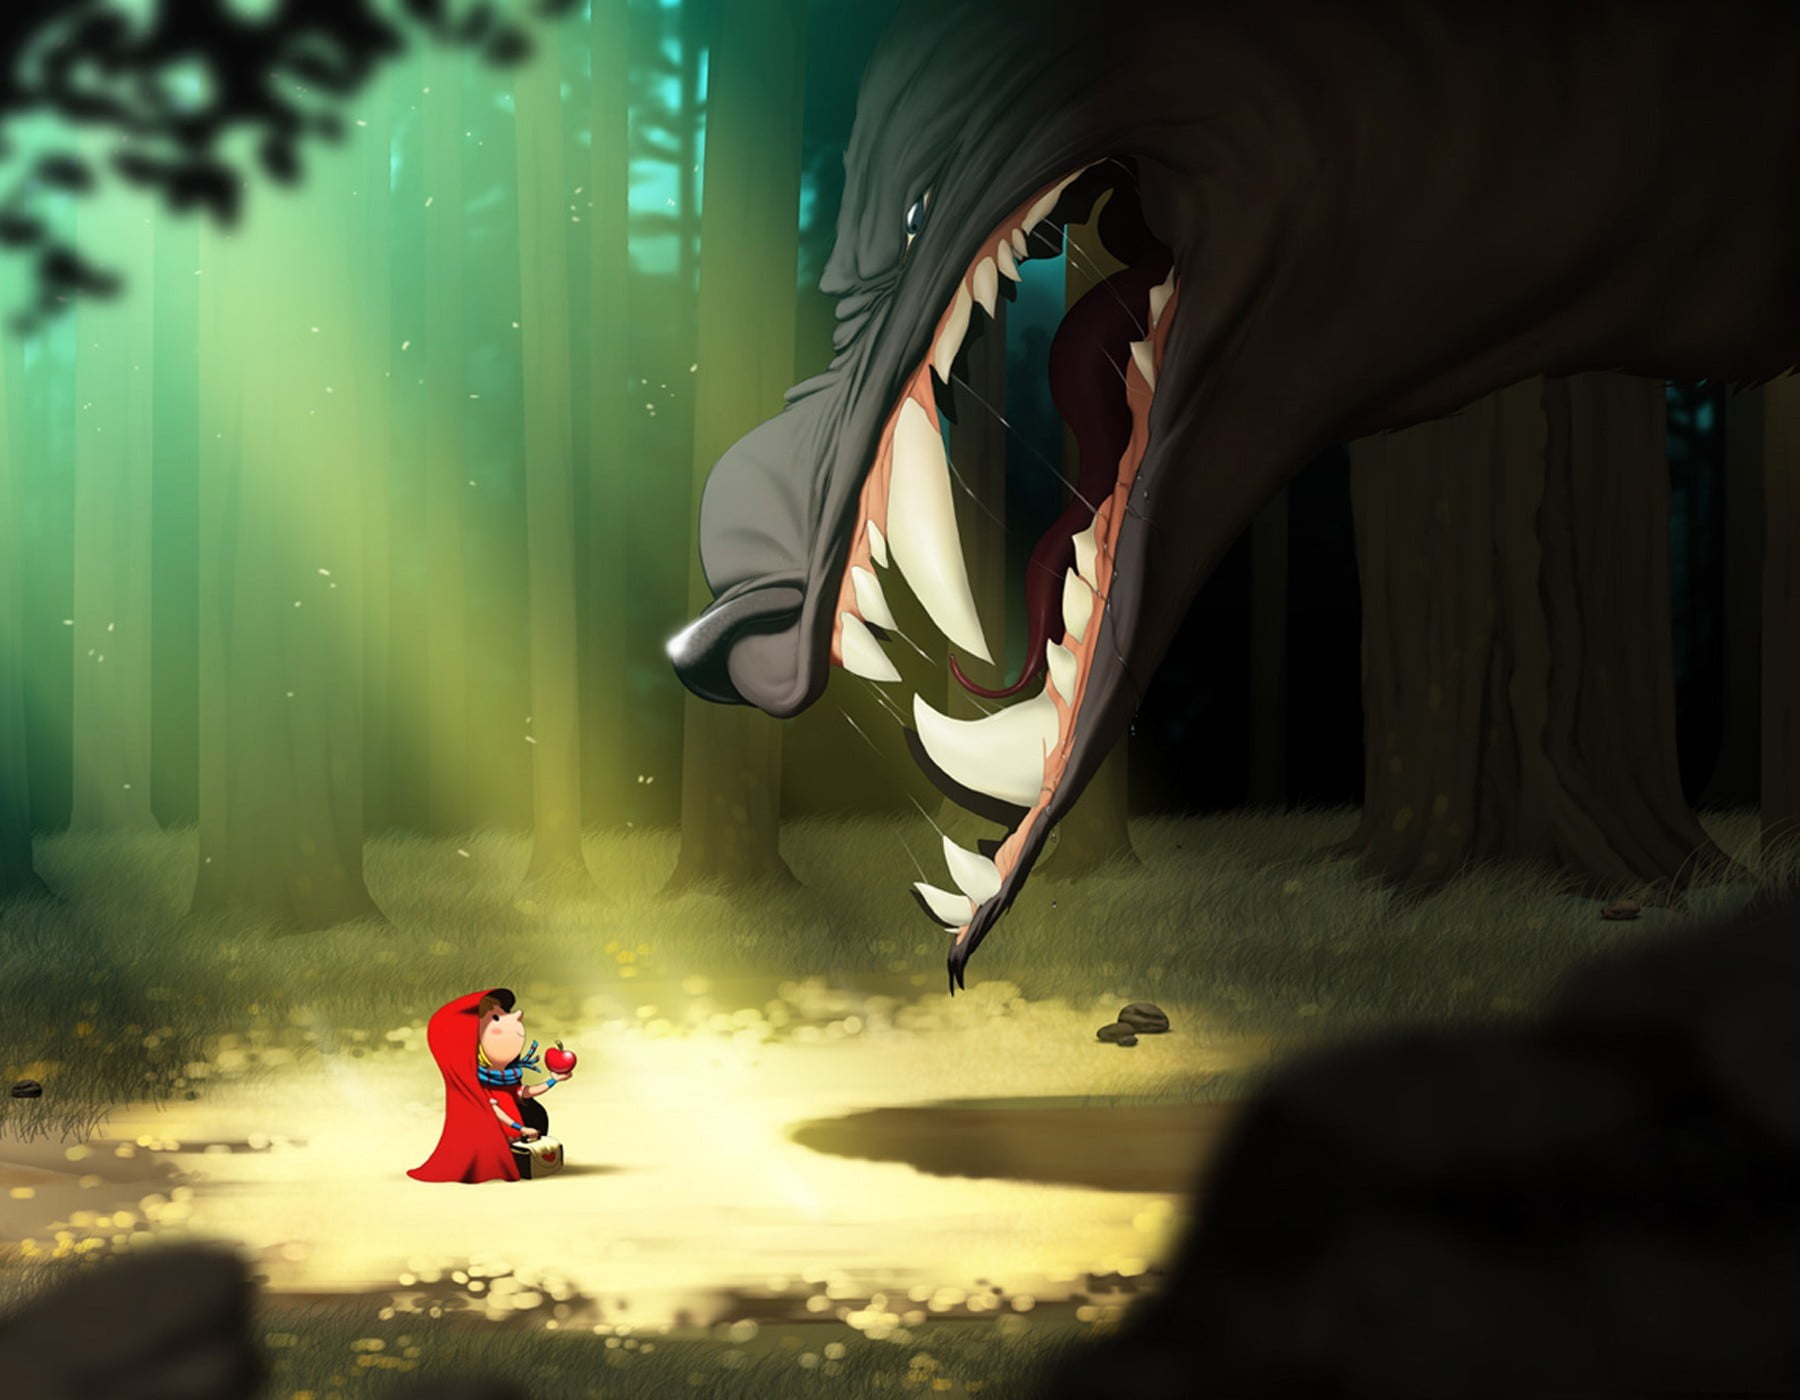 Little Red Riding Hood And Big Bad Wolf Clip Art Little Red Riding Hood Wolf Wood Forest Hd Wallpaper Wallpaper Flare